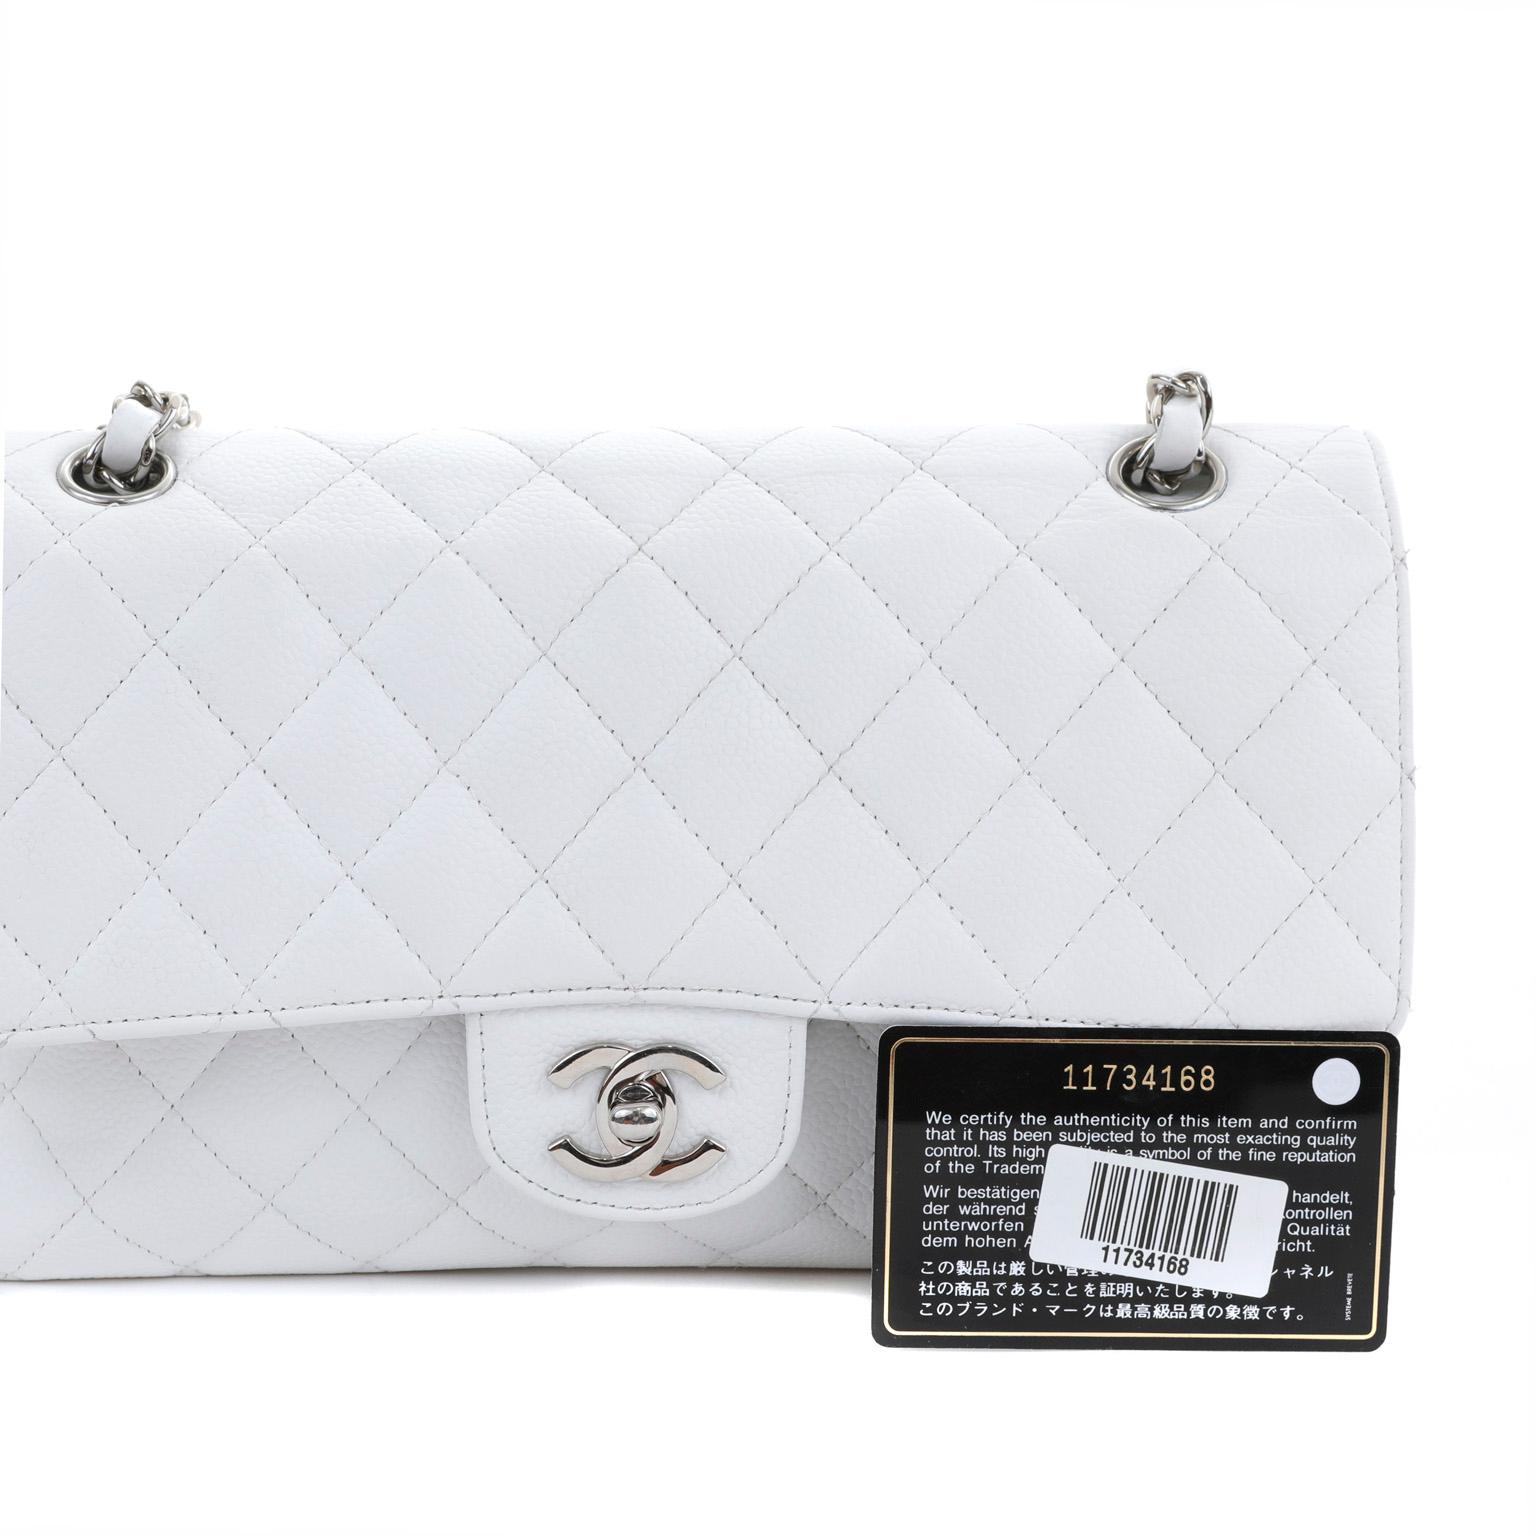 Chanel White Caviar Leather Medium Classic Flap Bag with Silver Hardware 1